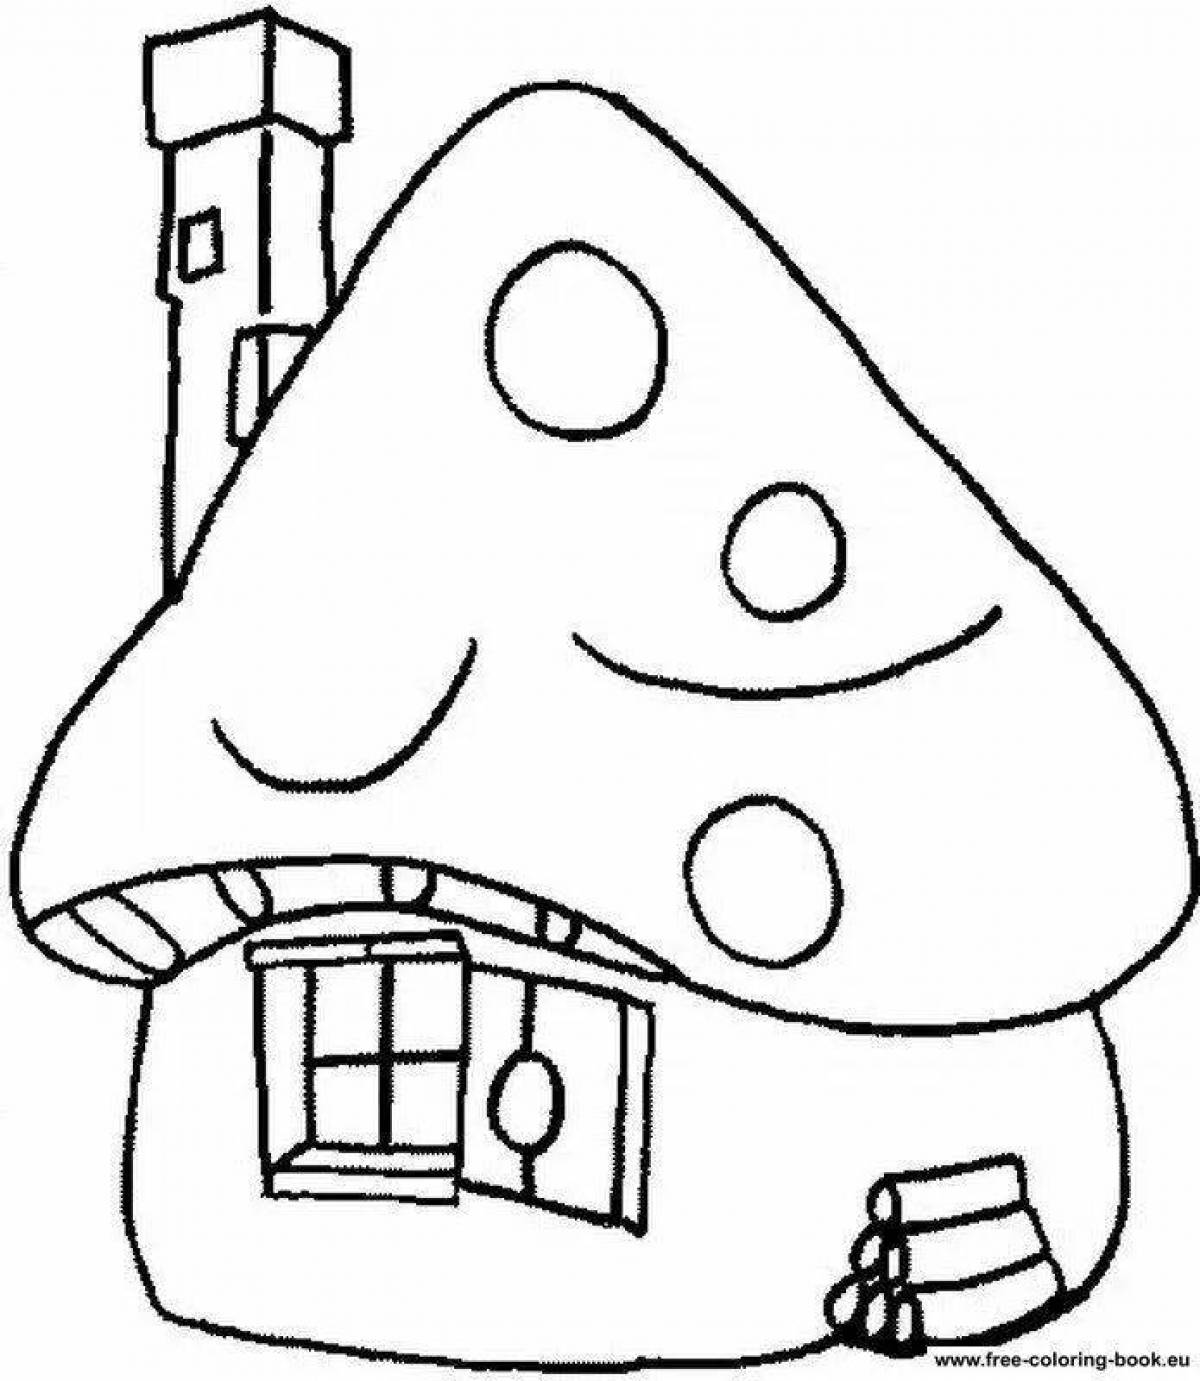 Gorgeous homebody coloring page